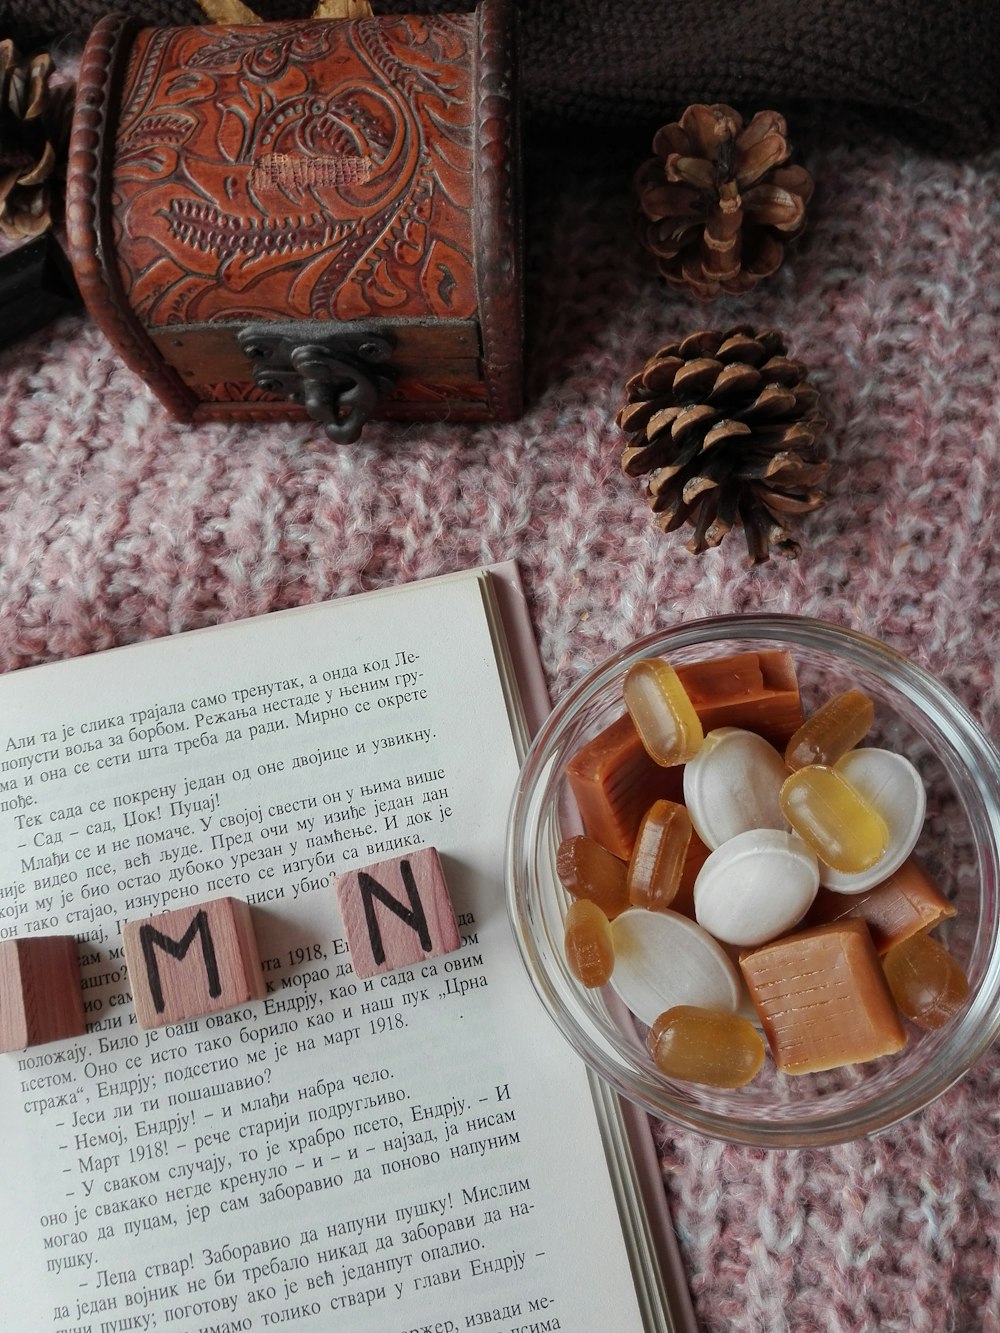 candies in bowl beside book